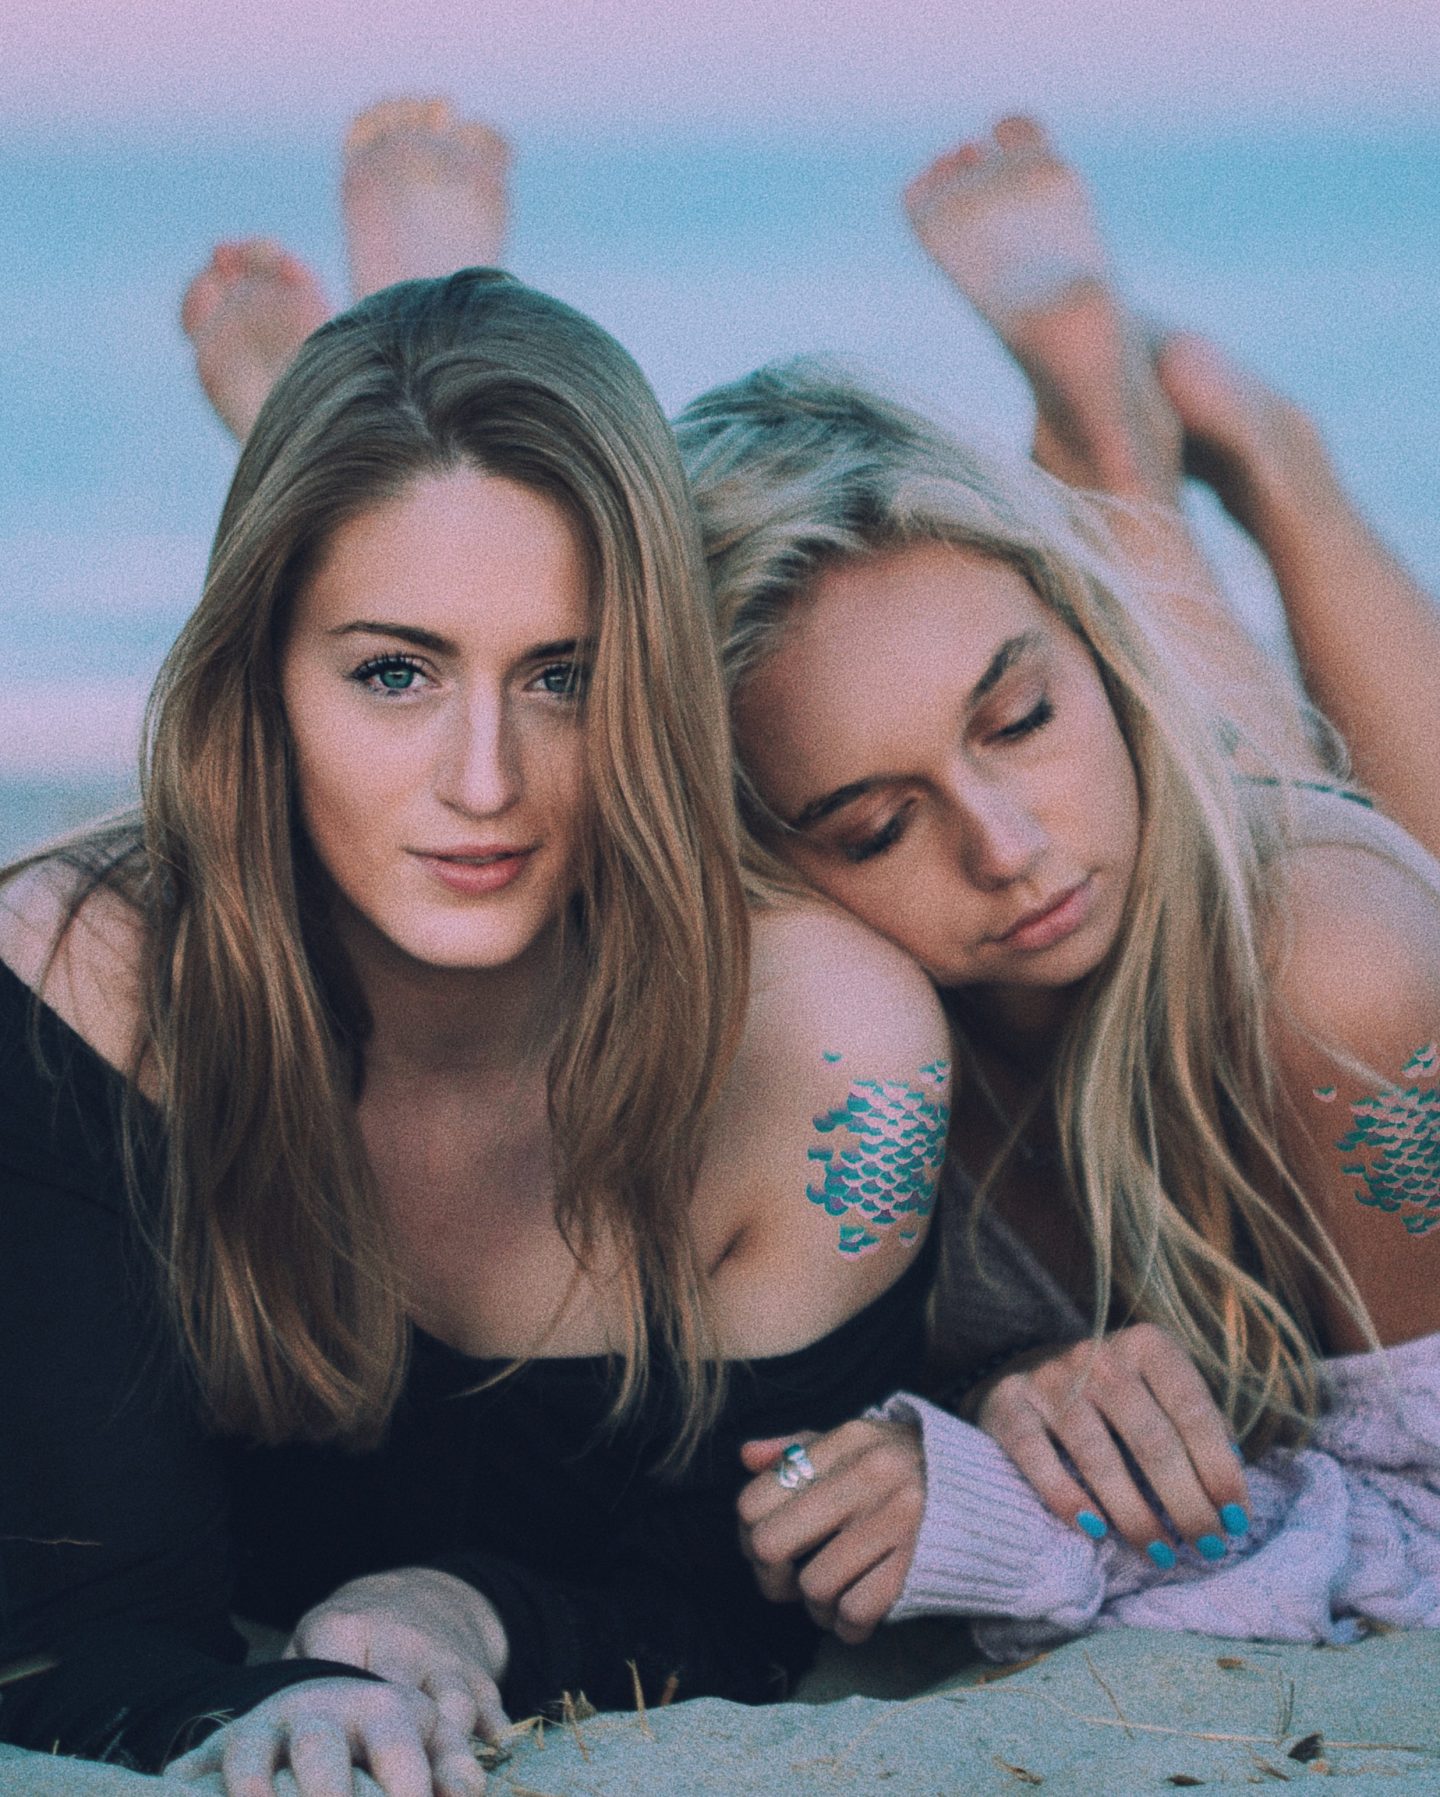 Two women on a beach wearing mermaid scale temporary tattoos.